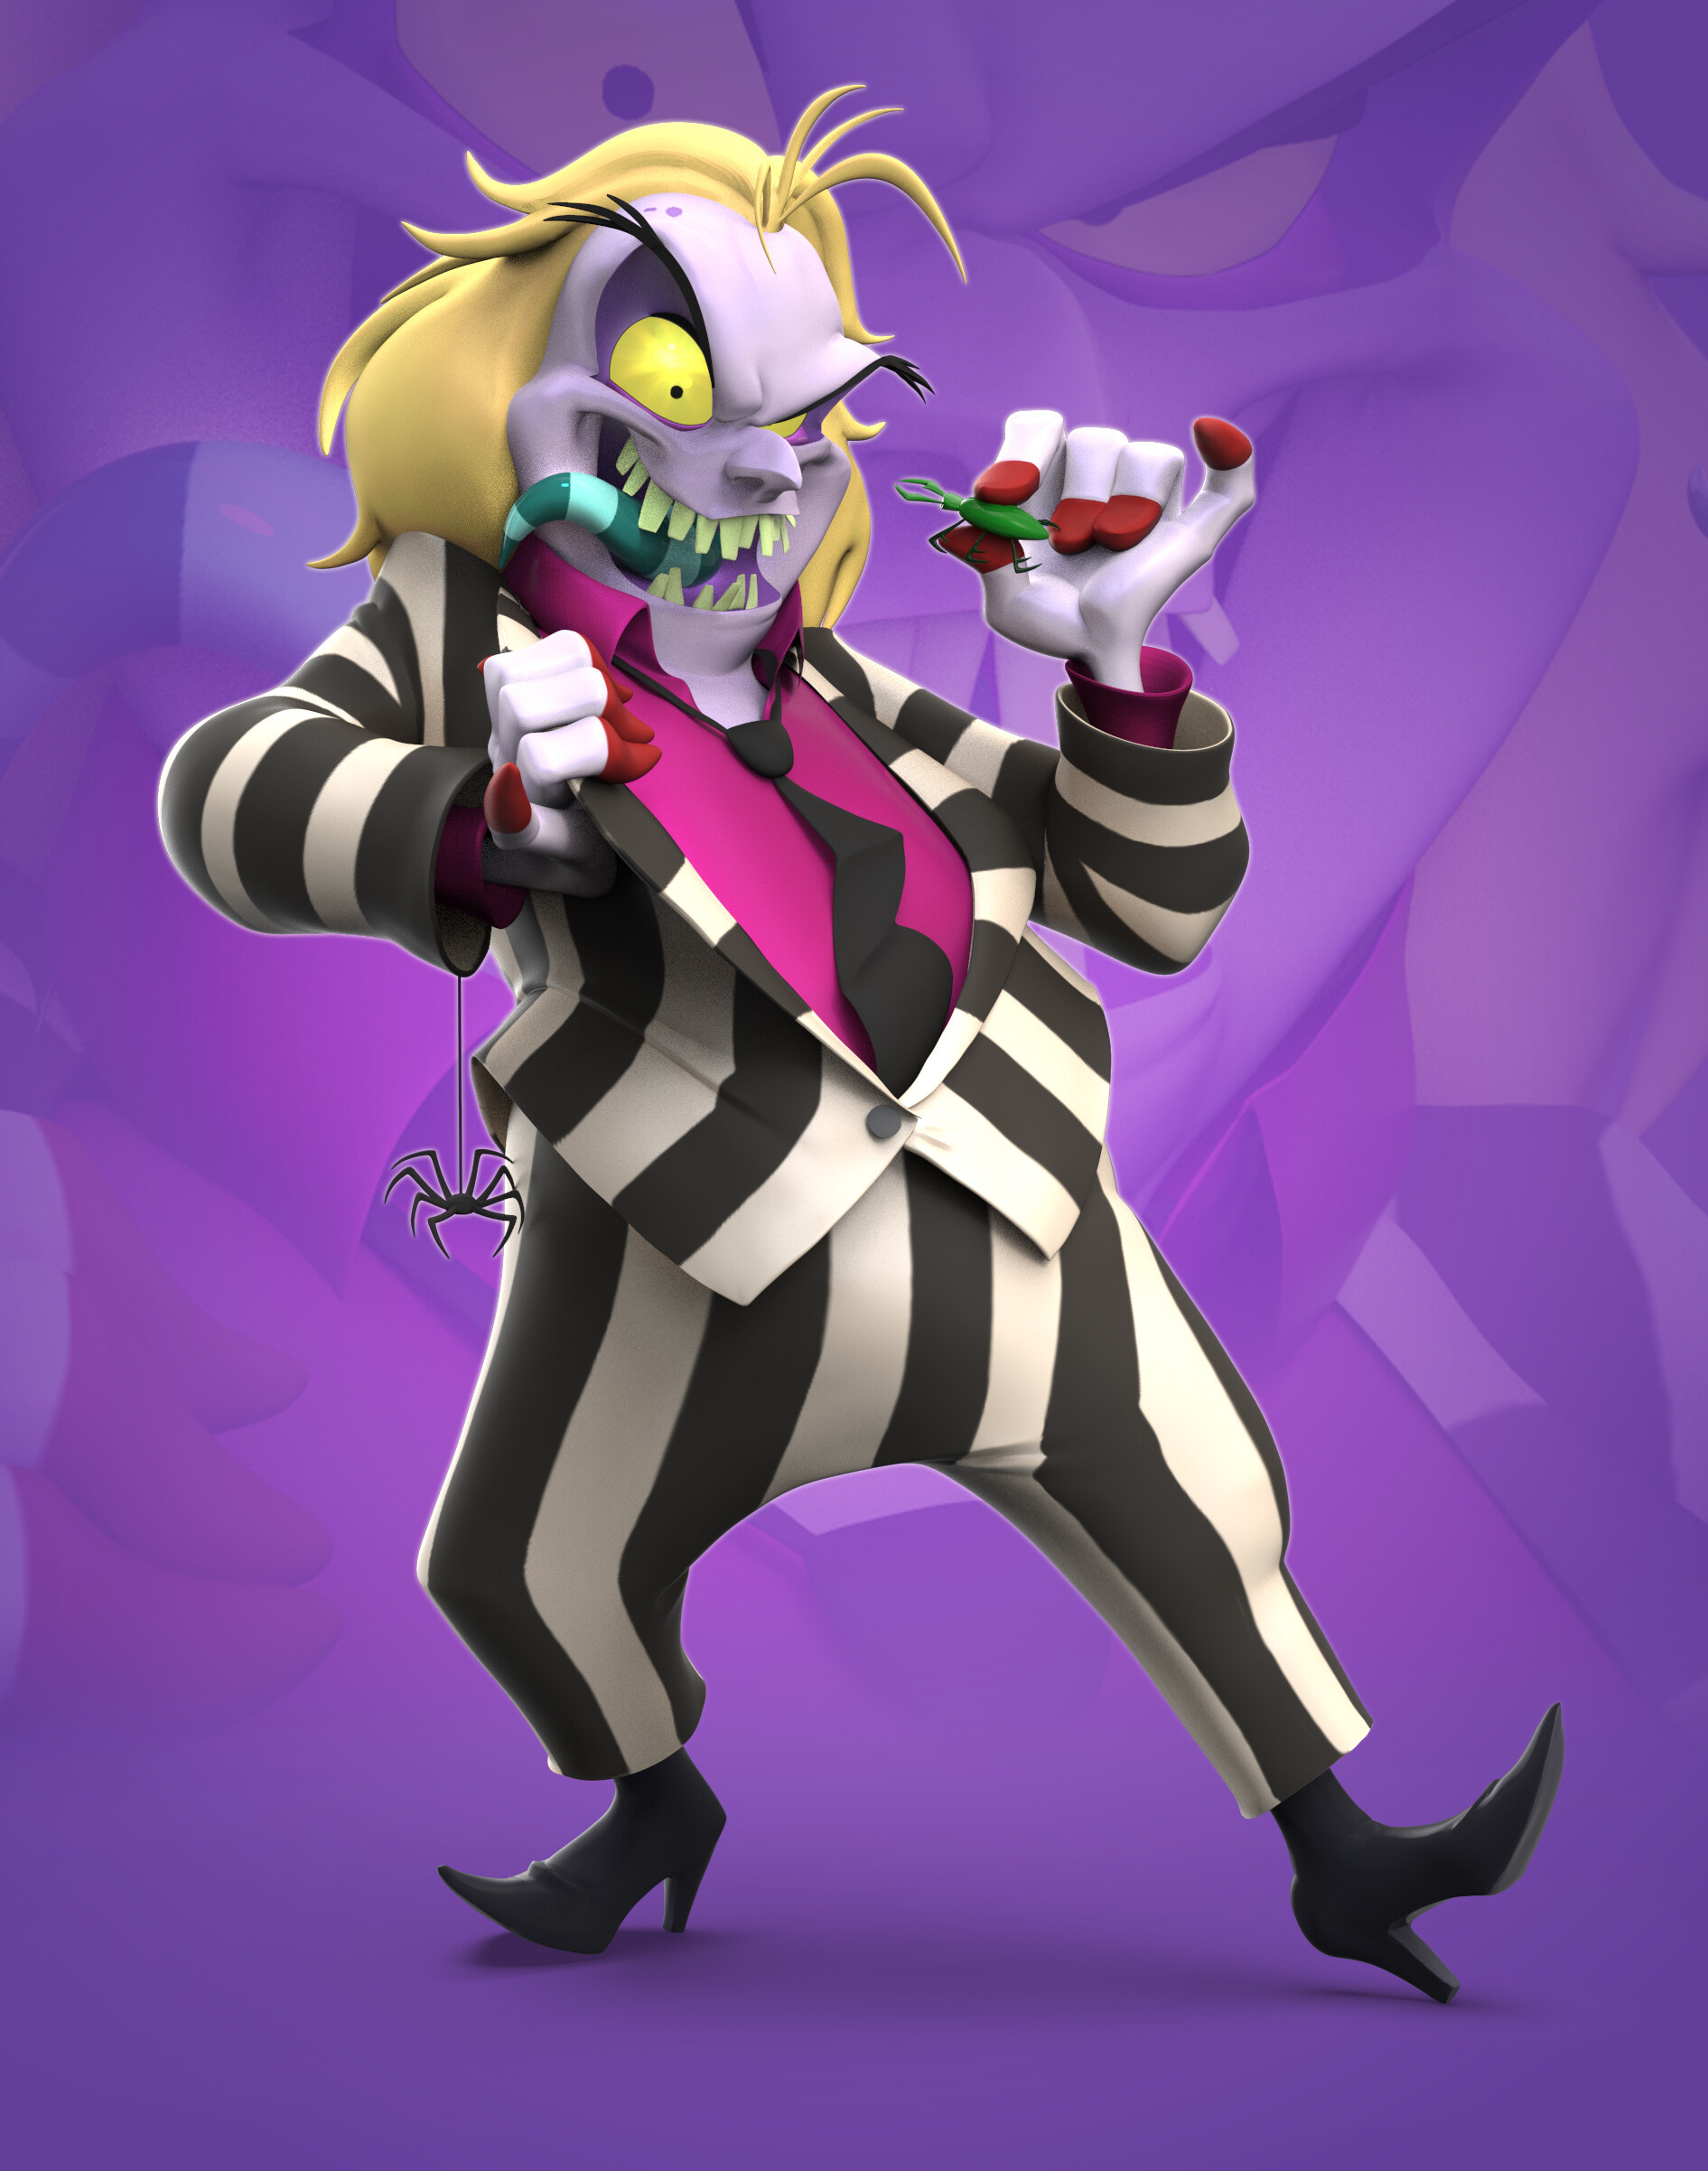 Beetlejuice (Cartoon): Named after the star Betelgeuse, Able to change shape, transform and conjure objects, teleport. 1900x2410 HD Background.